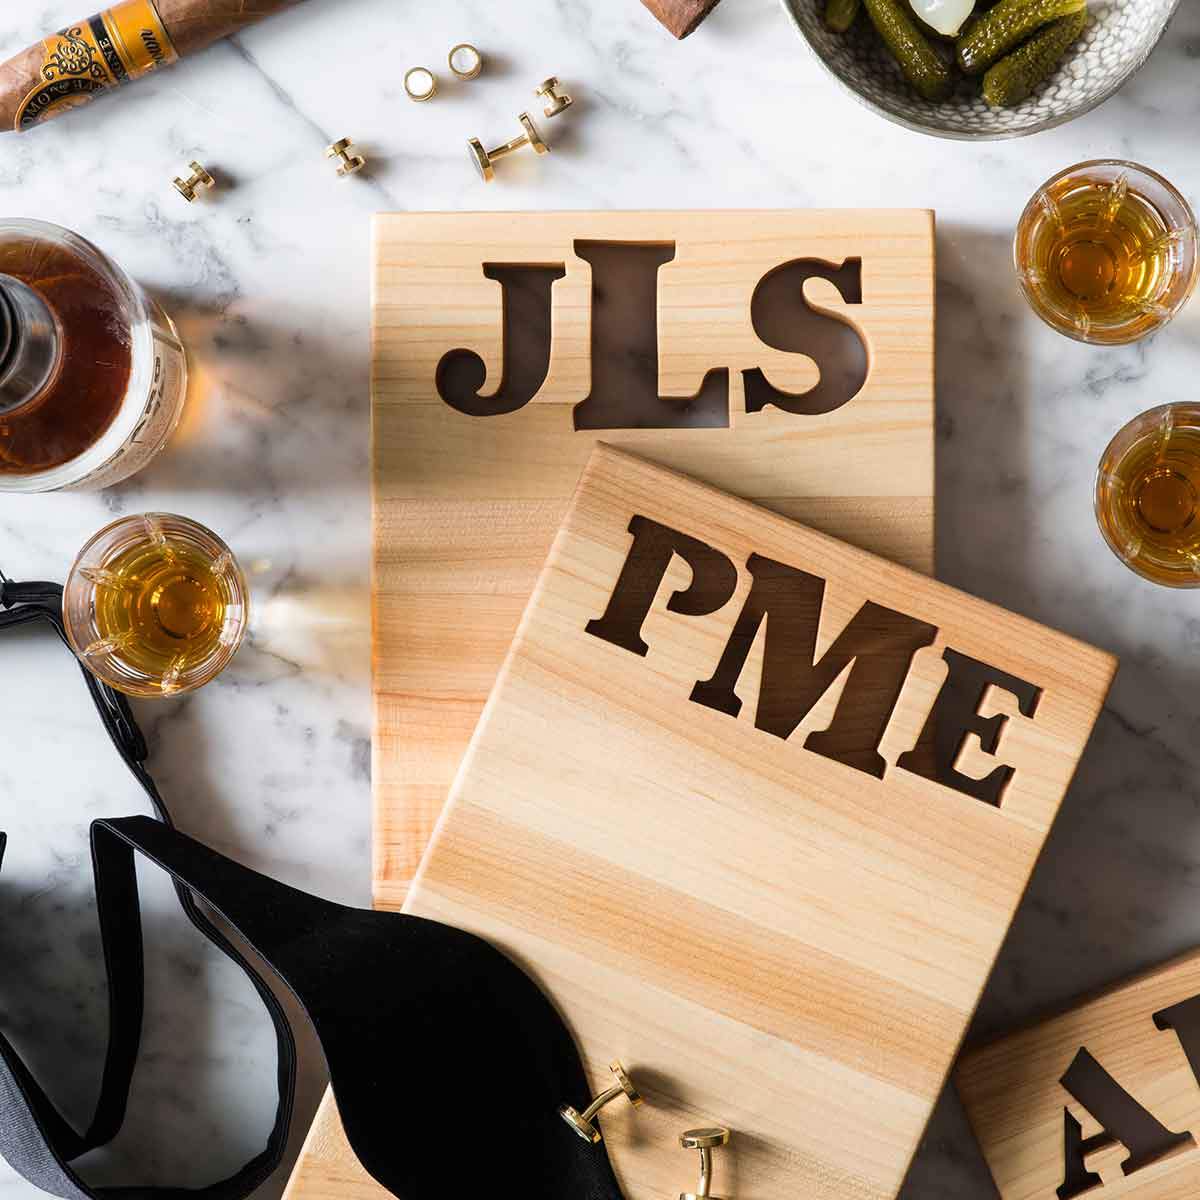 Personalized Gifts For Men - Monogrammed Cutting Board with Bottle Opener